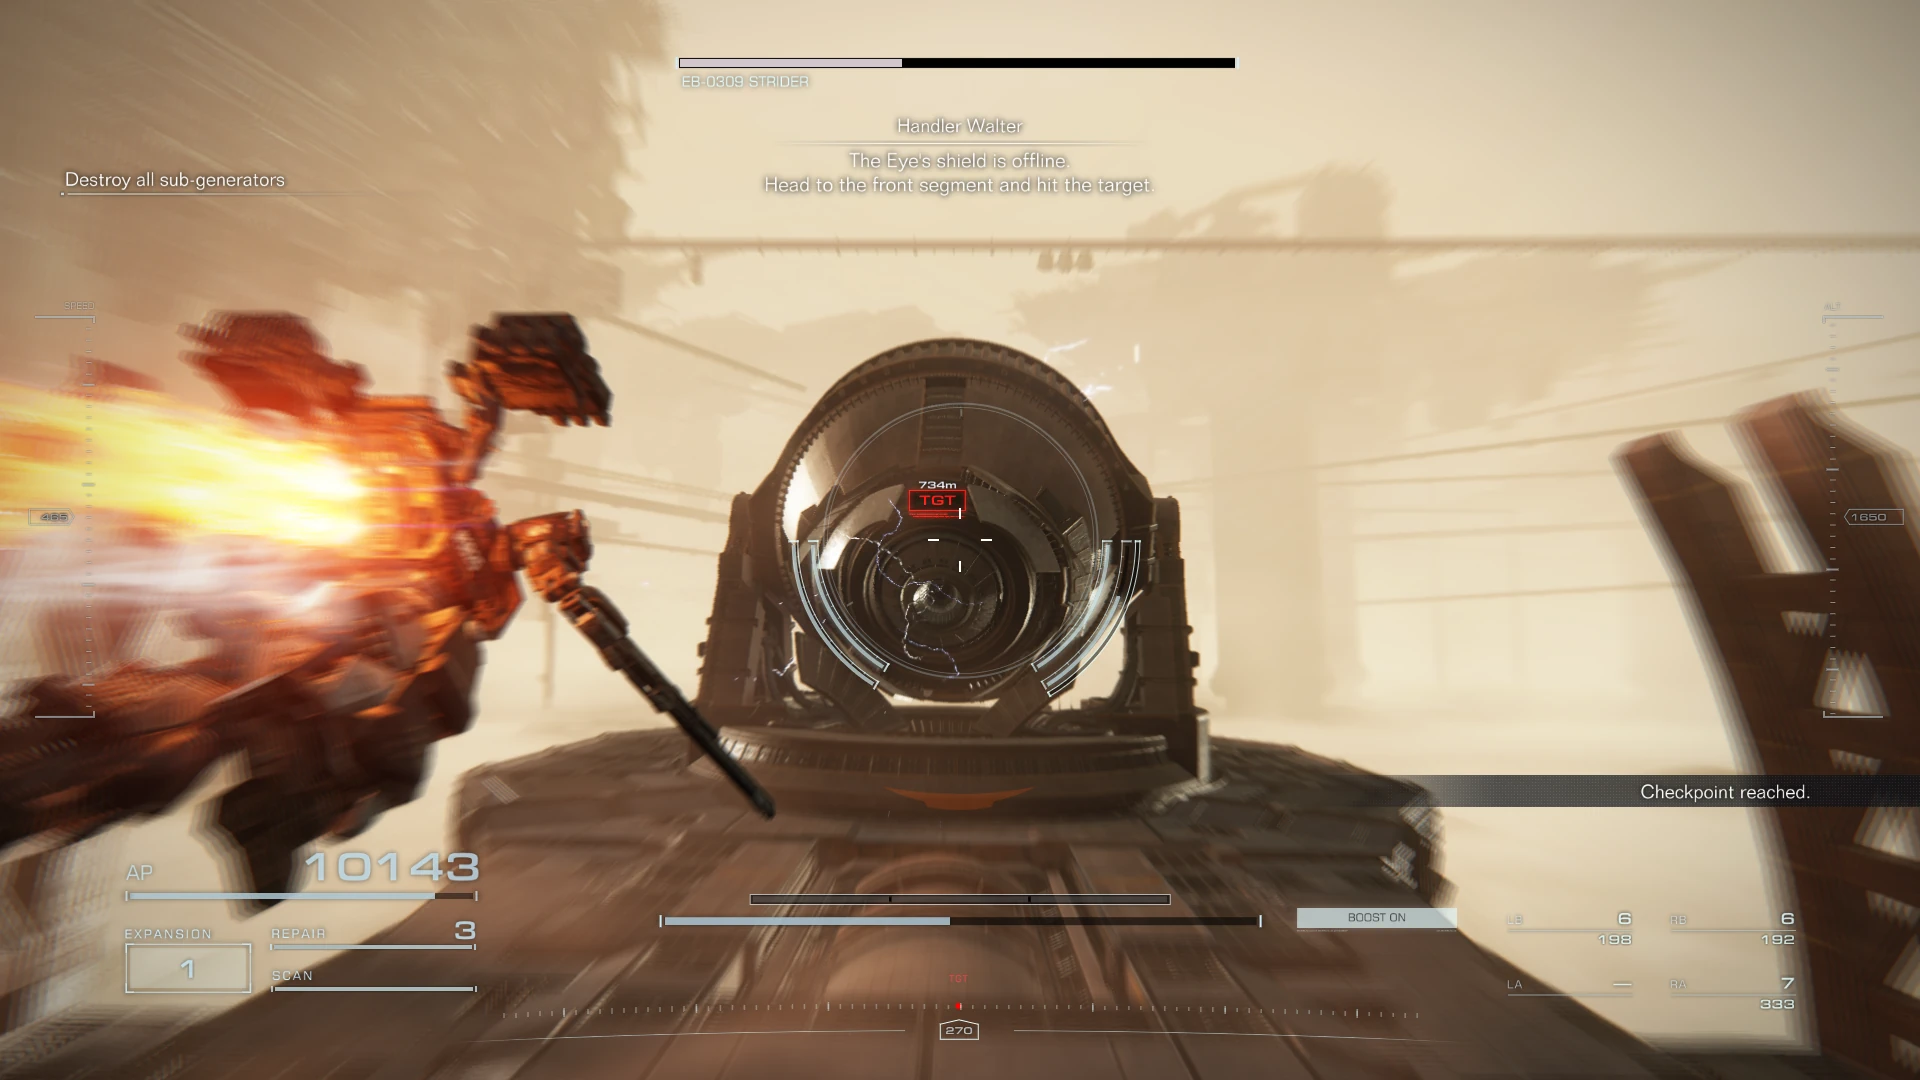 The player assault boosts towards a giant eye shaped laser cannon.